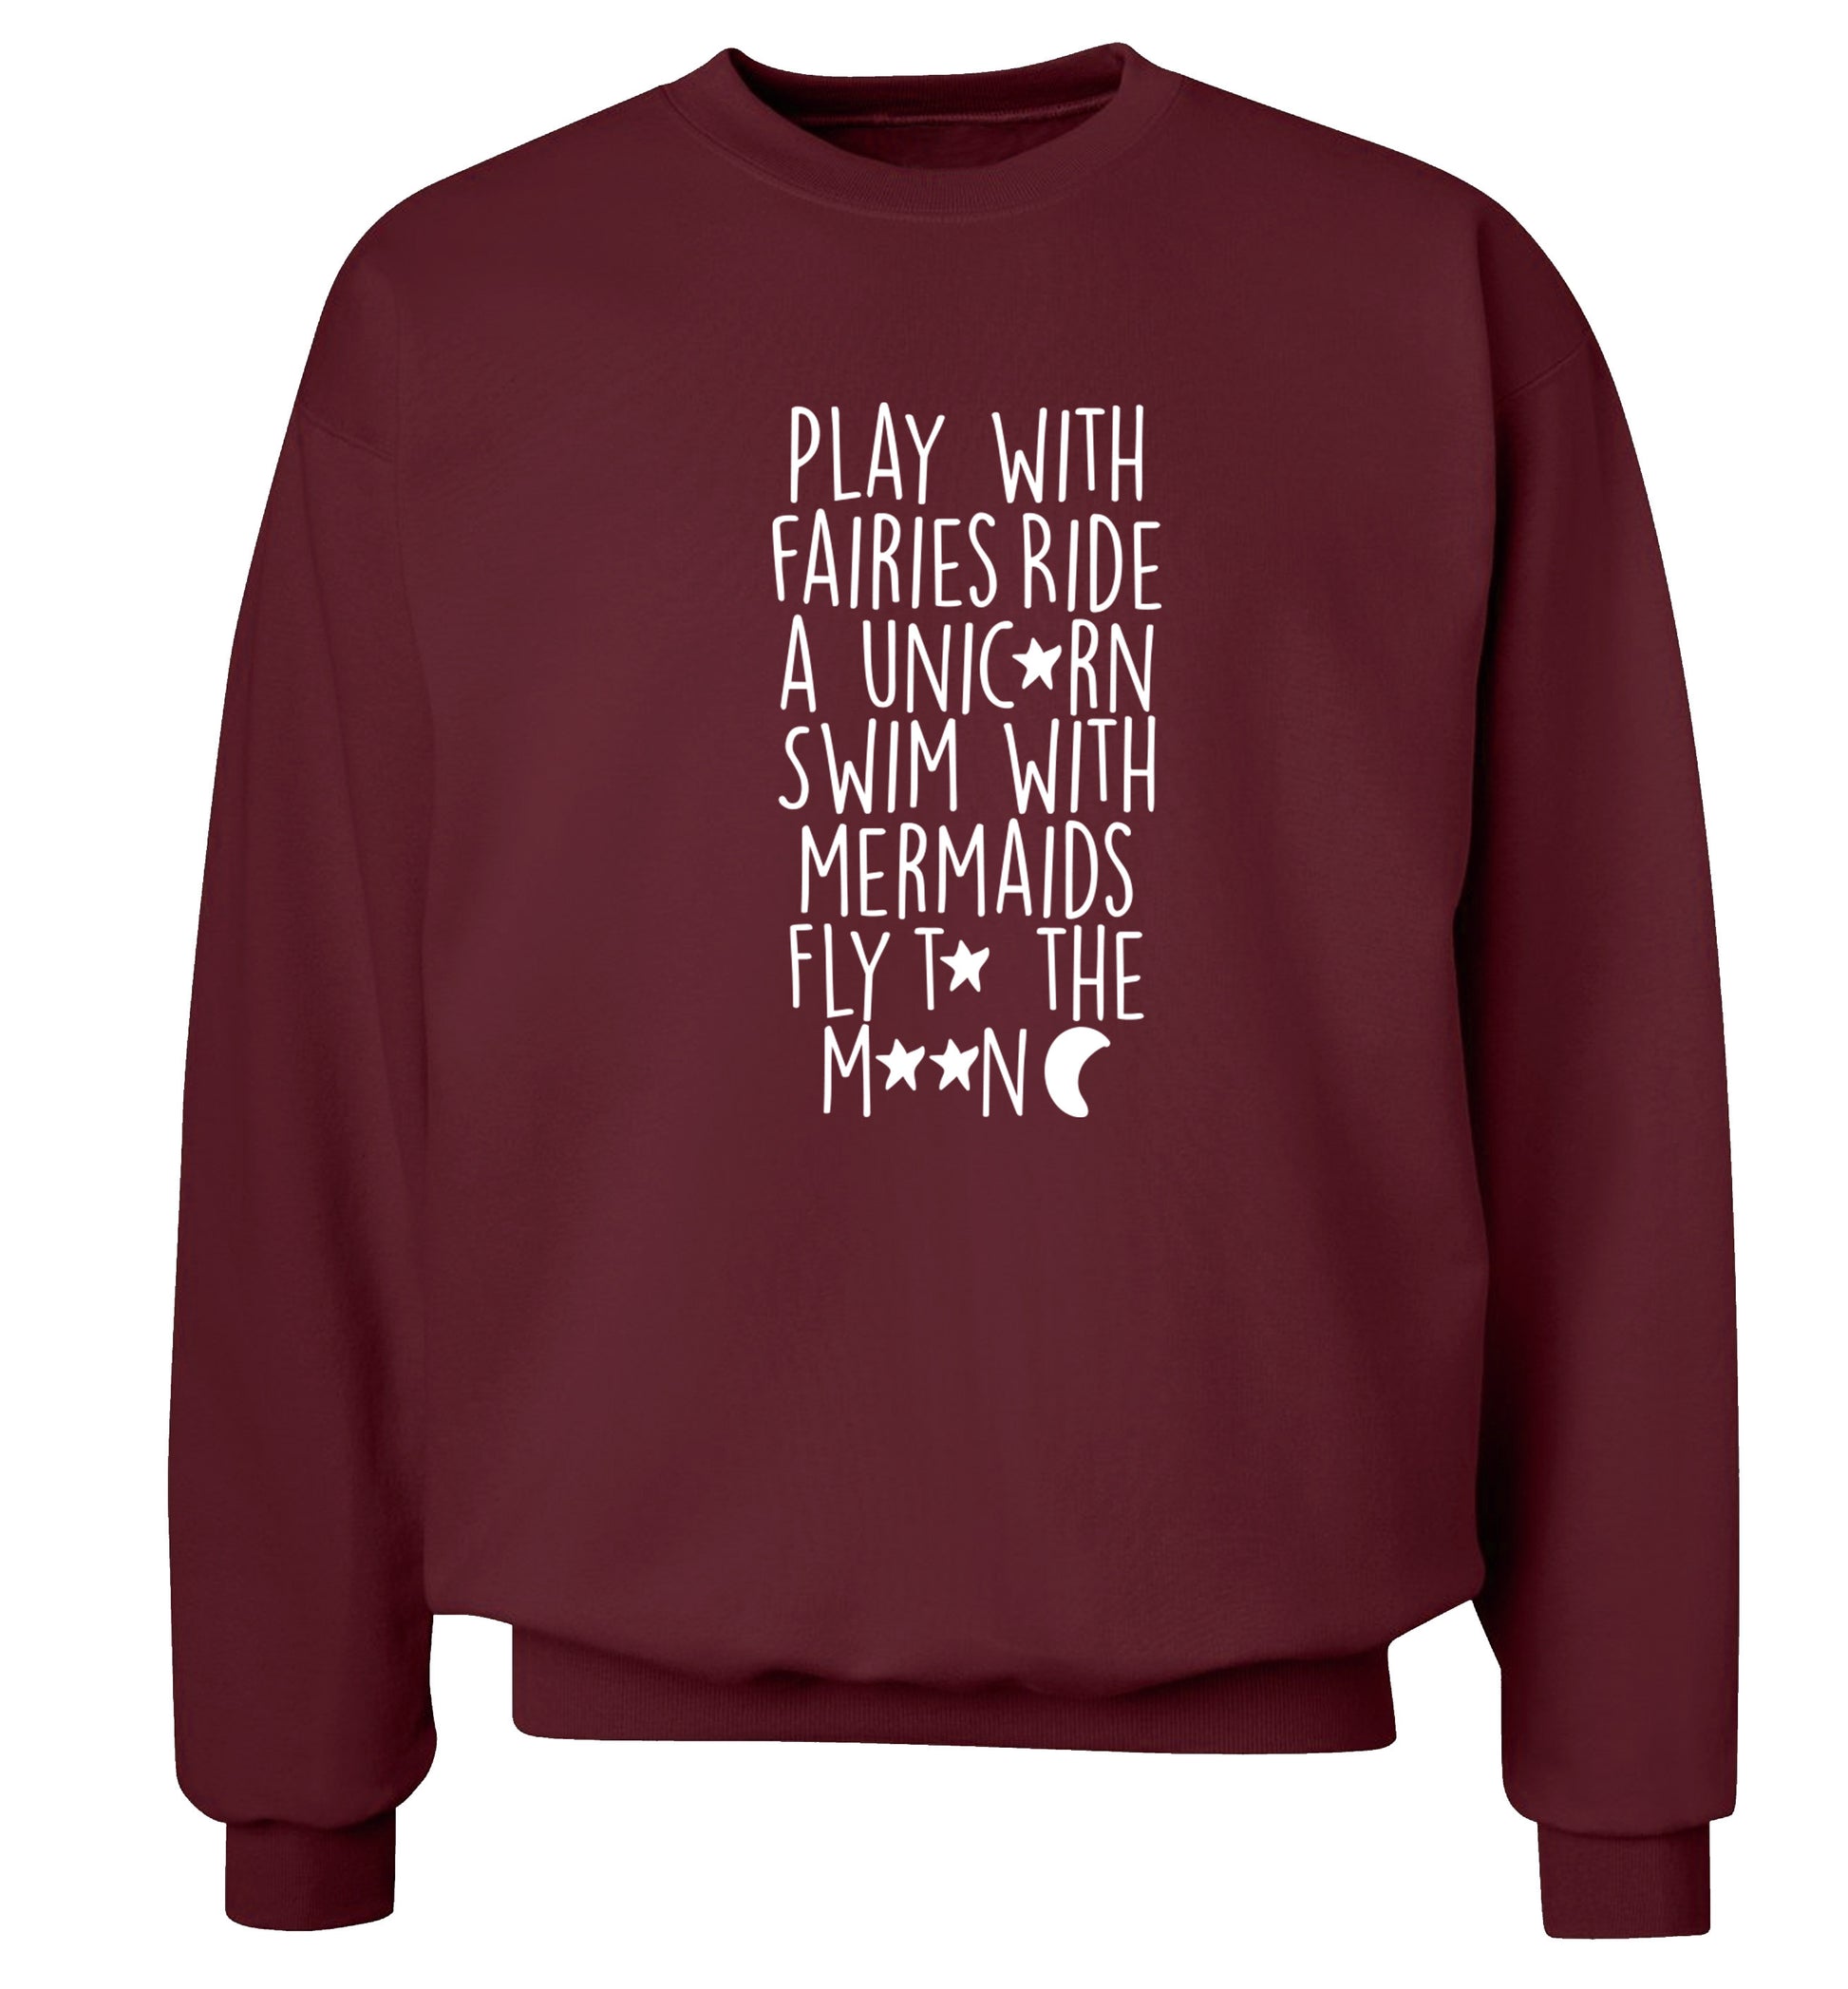 Play with fairies ride a unicorn swim with mermaids fly to the moon Adult's unisex maroon Sweater 2XL